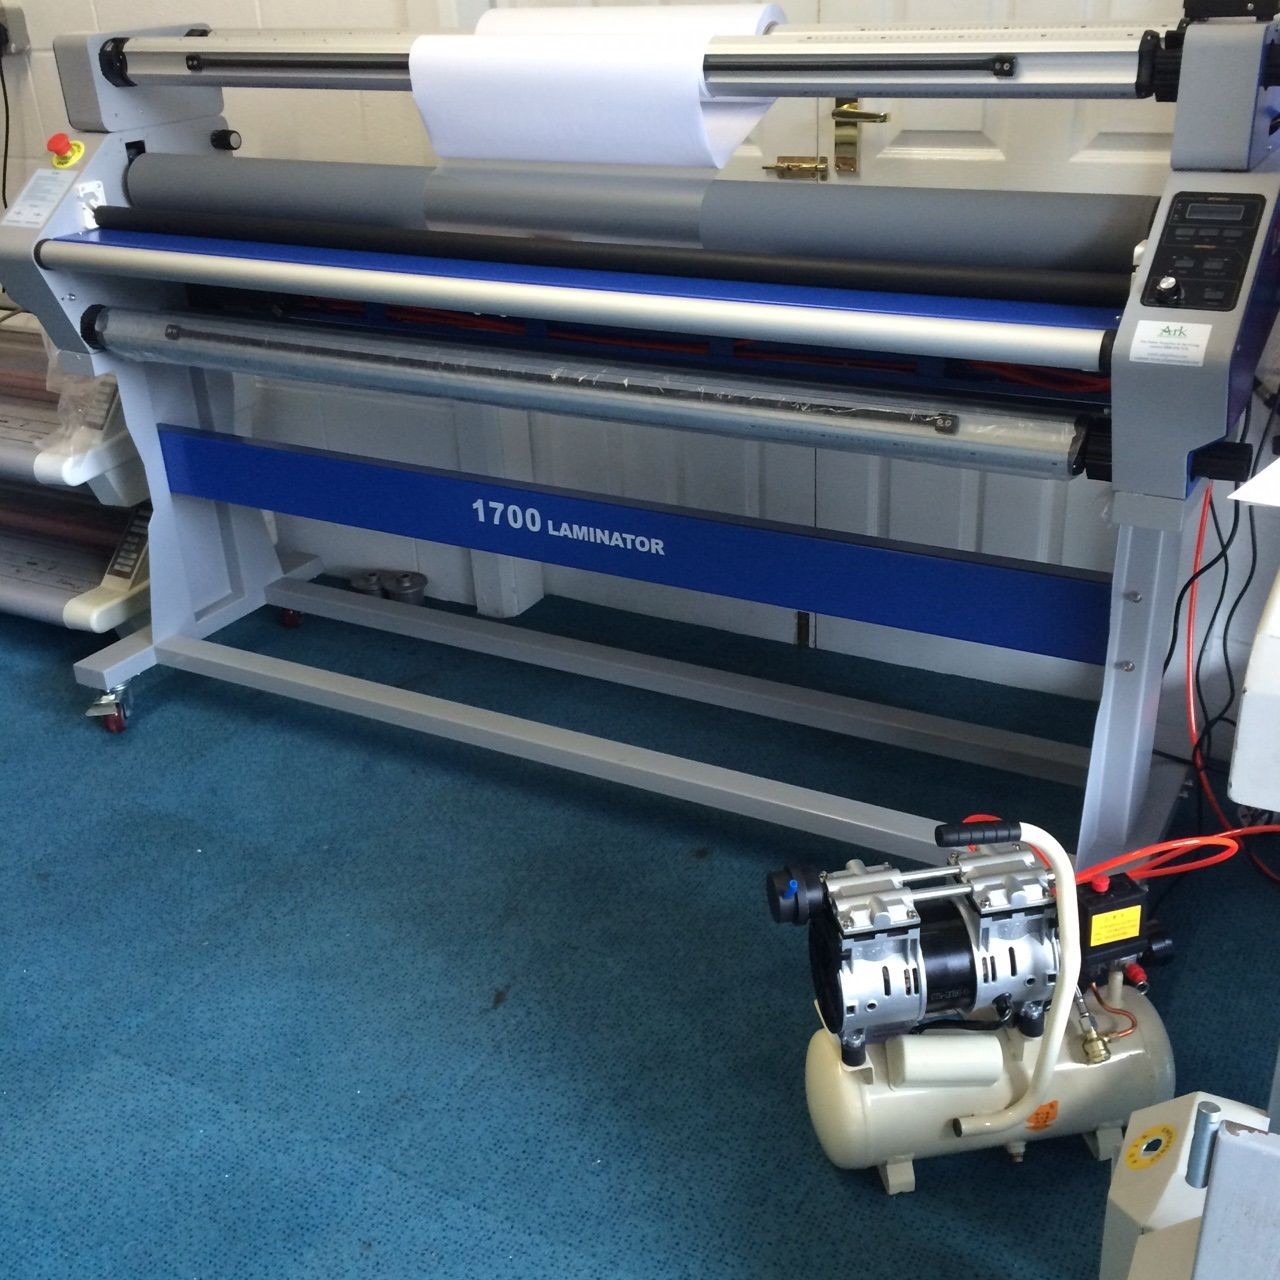 Get the Best Binding Equipments and Laminator from Ark Presentations